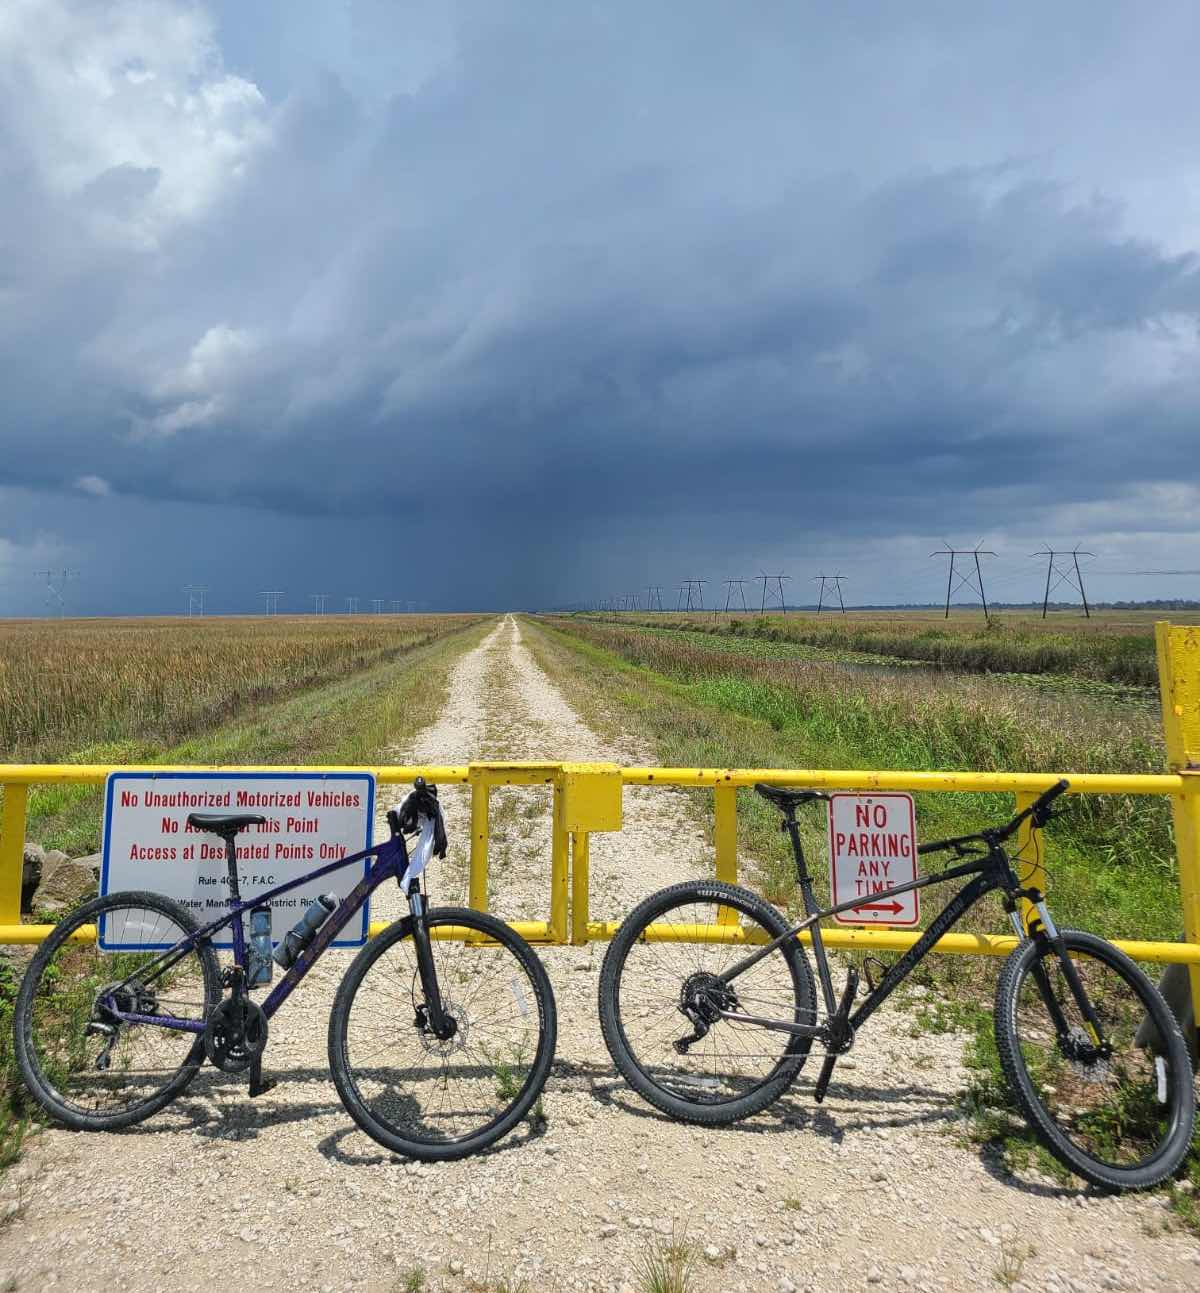 bikerumor pic of the day two bicycles lean against a yellow metal gate crossing a gravel road that seems to go straight for miles. The road is bordered by everglades on either side and is lit up by the sun as a storm cloud is dark and ominous in the distance.